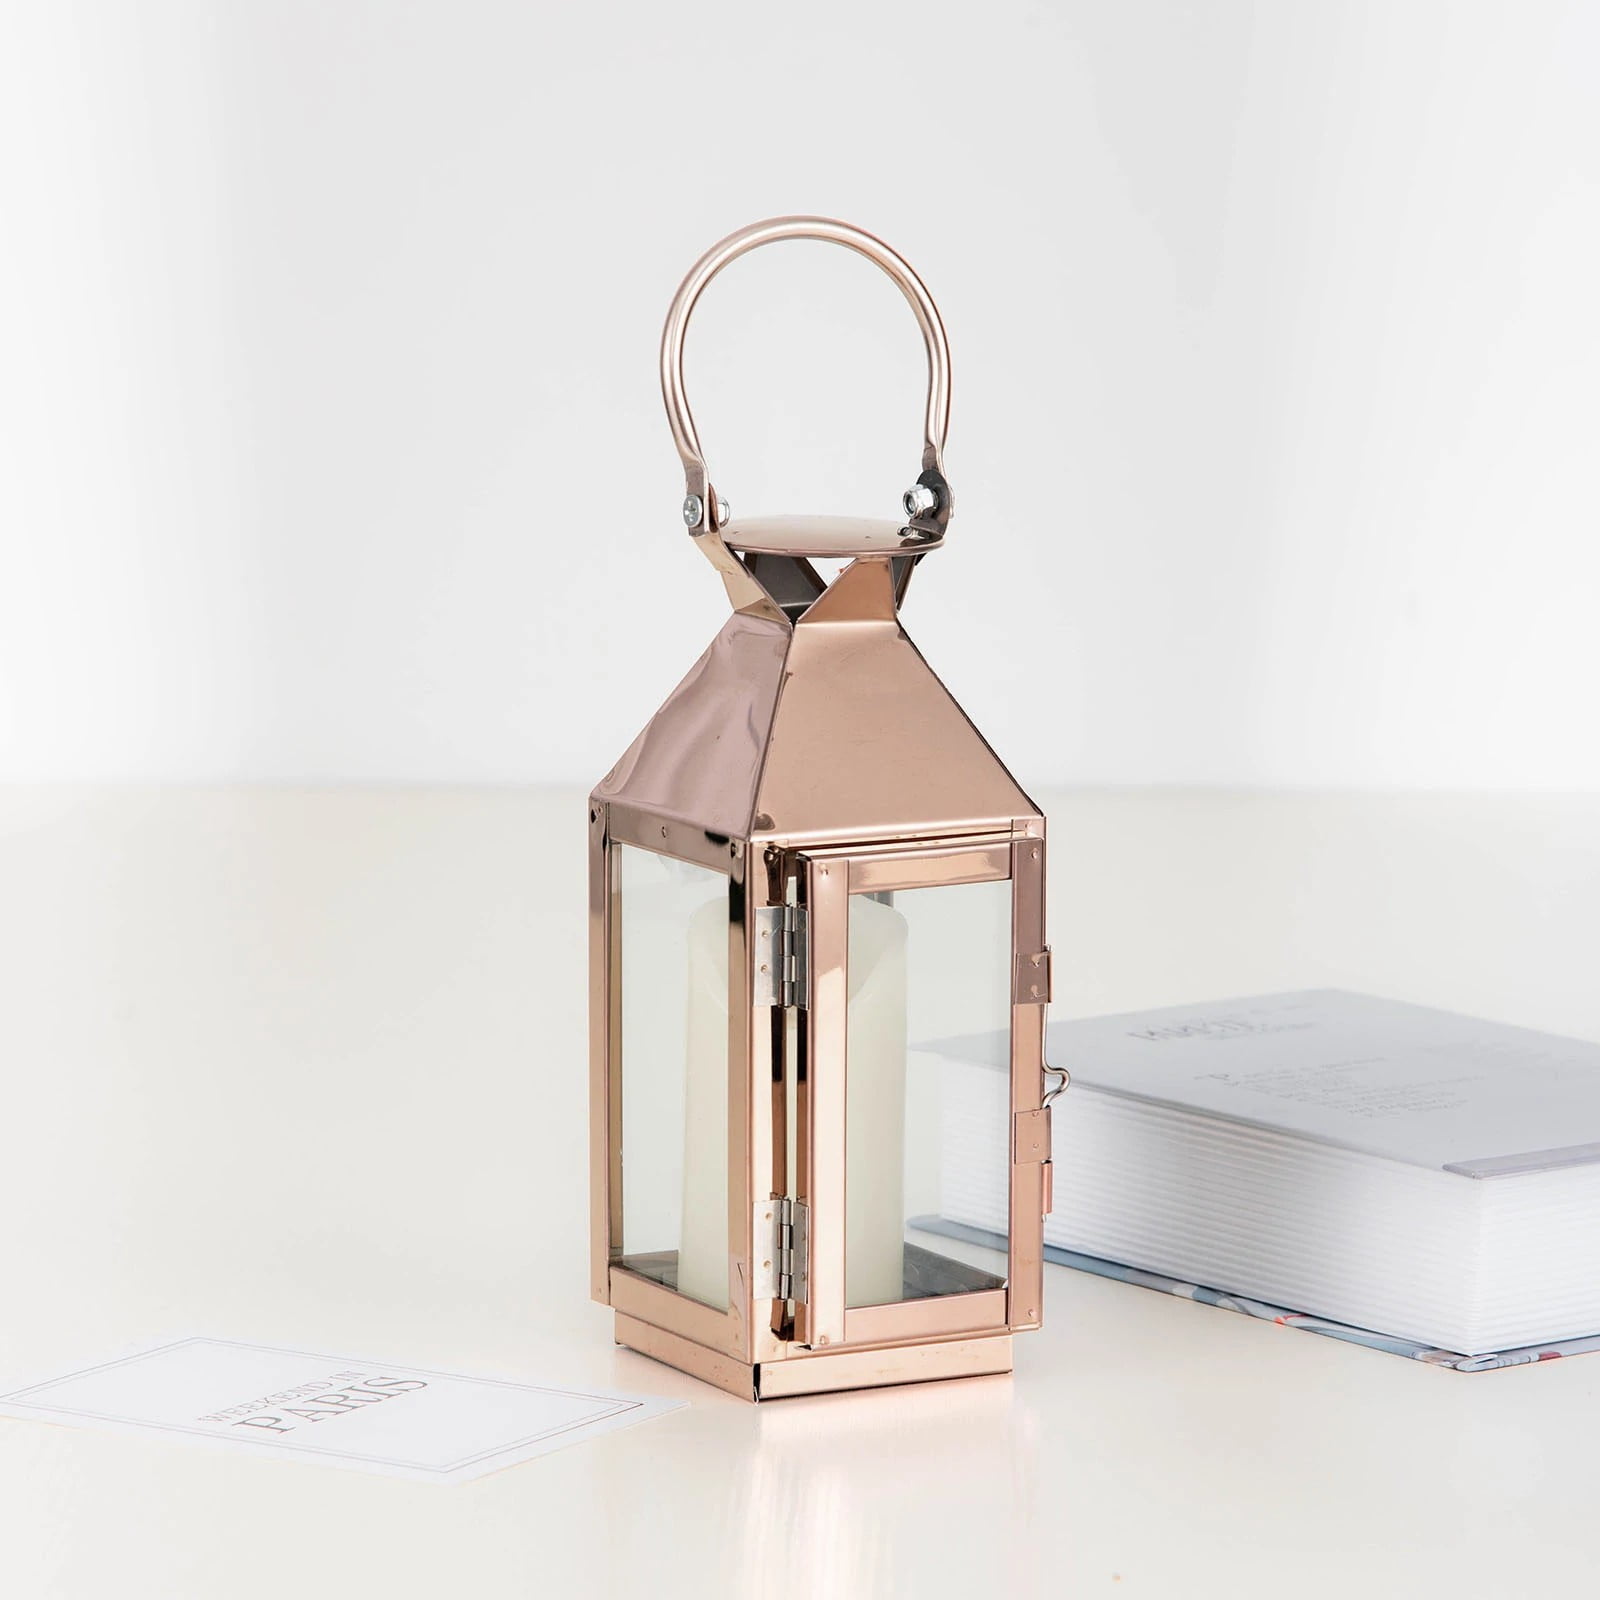 Oblong Copper Top White Wooden Candle Lantern with Rose Gold Handle 